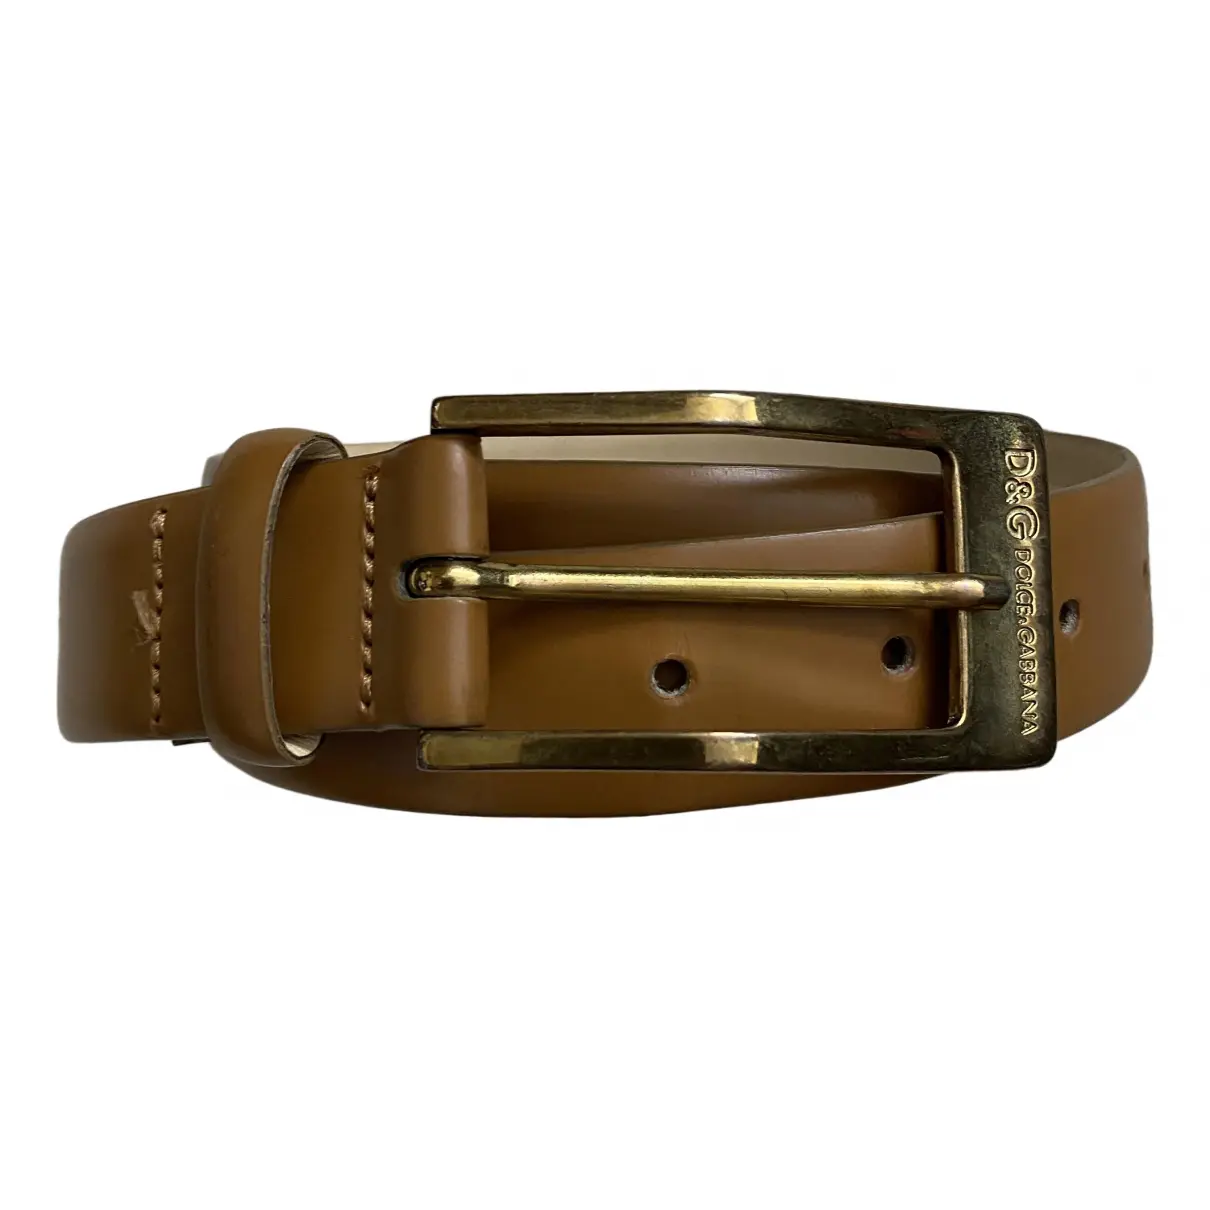 D&G Leather belt for sale